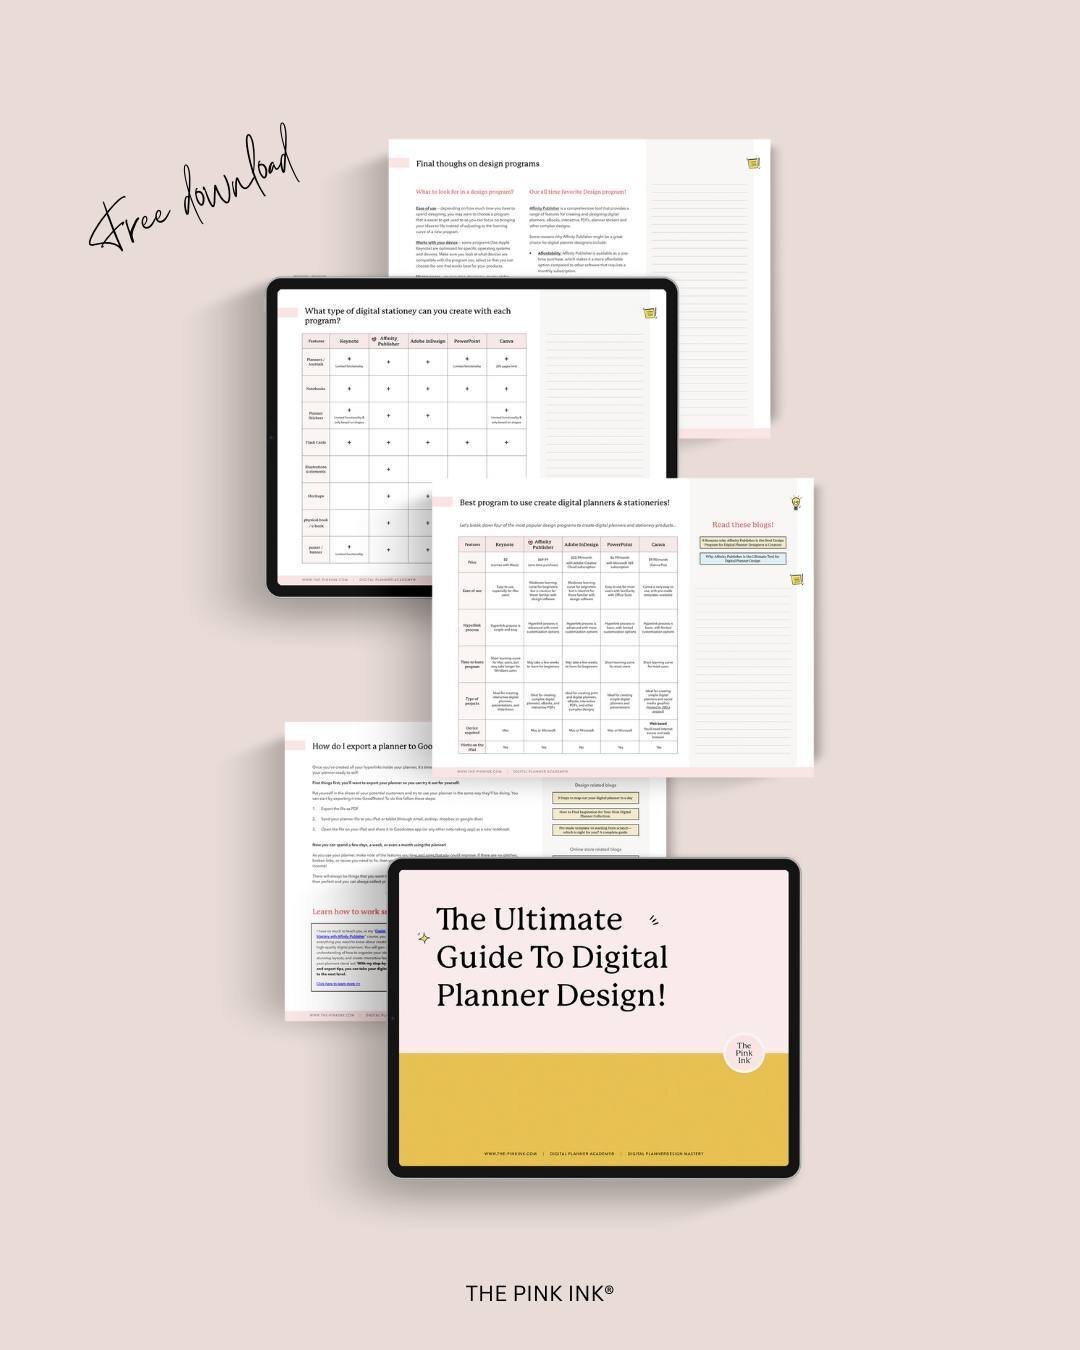 Ever felt stuck staring at your screen, not knowing how to bring your digital planner vision to life? 🤔⁠
⁠
Well, guess what? I've been there too.⁠
⁠
But here's the game changer - The Ultimate Guide to Digital Planner Design! ✨⁠
⁠
It's your FREE tick